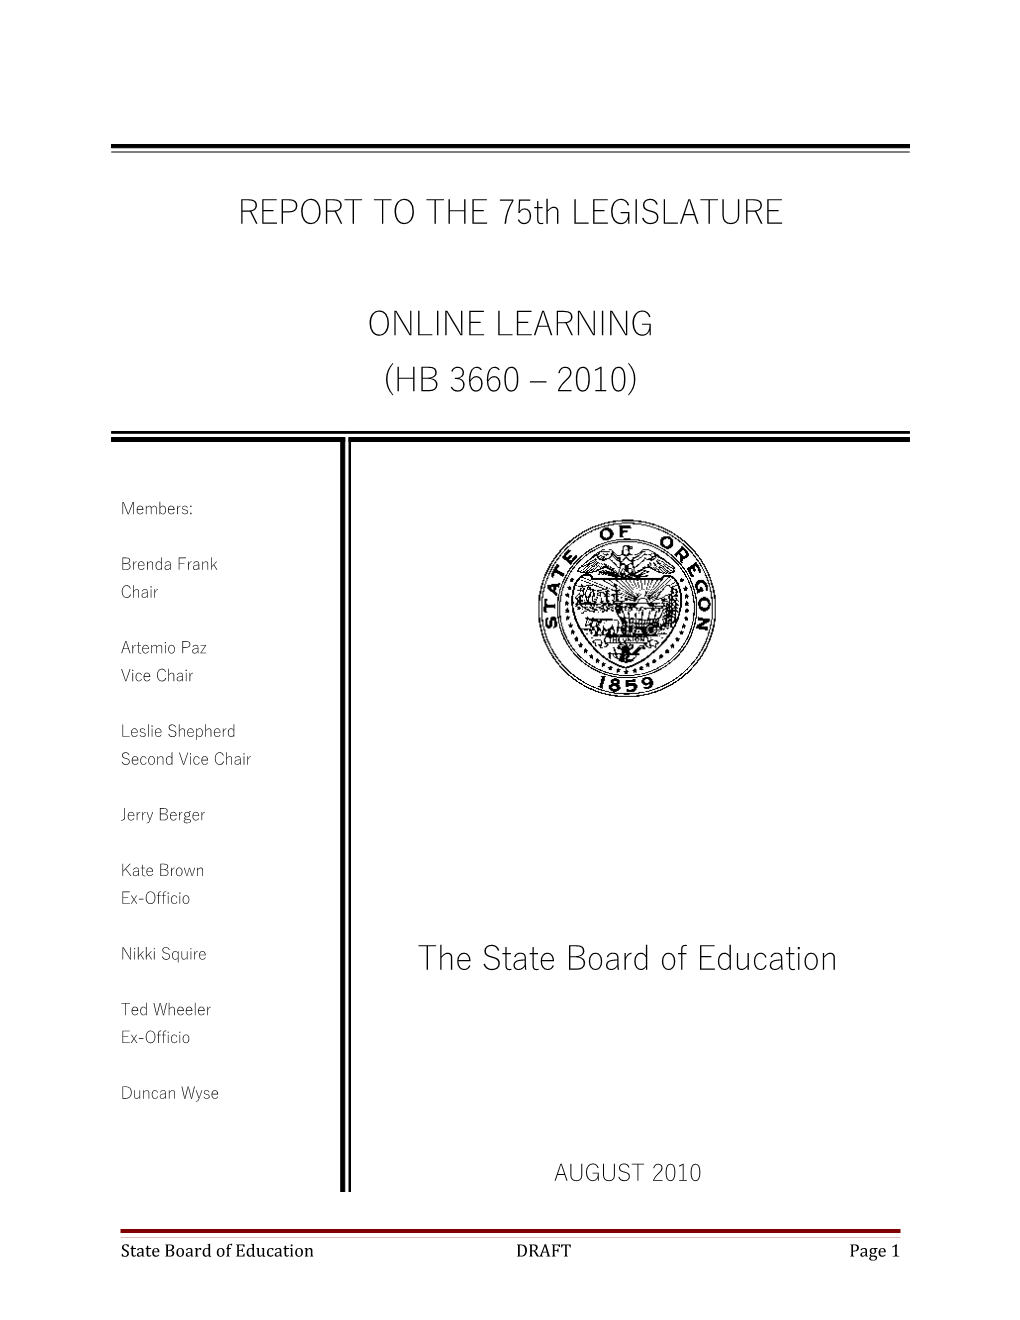 Report on Online Learning